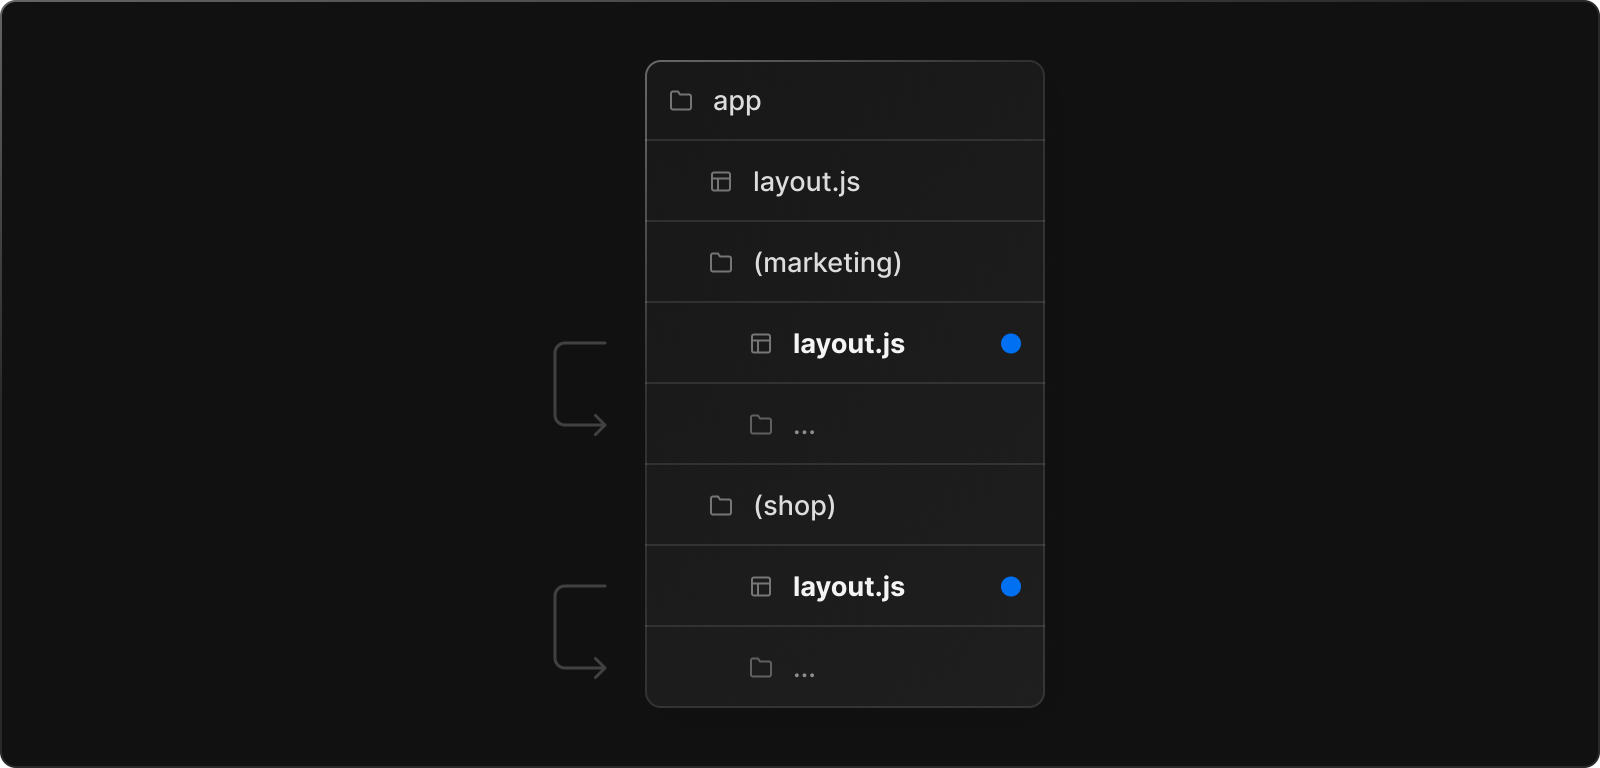 Multiple layouts in the same hierarchy